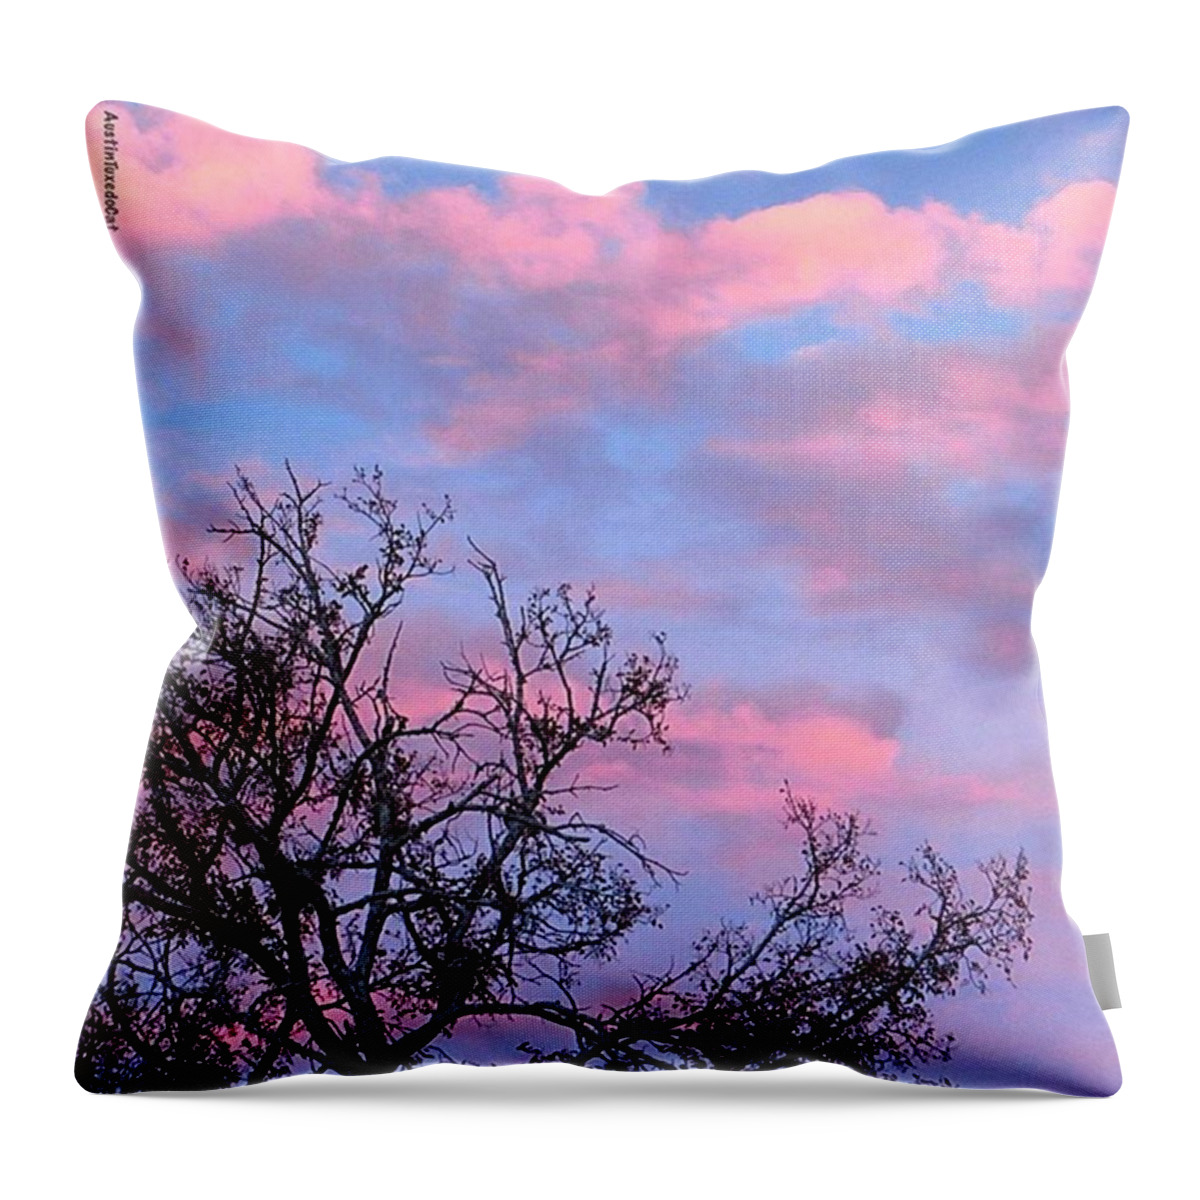 Keepaustinweird Throw Pillow featuring the photograph #throwback To A #instaawesome #pink by Austin Tuxedo Cat